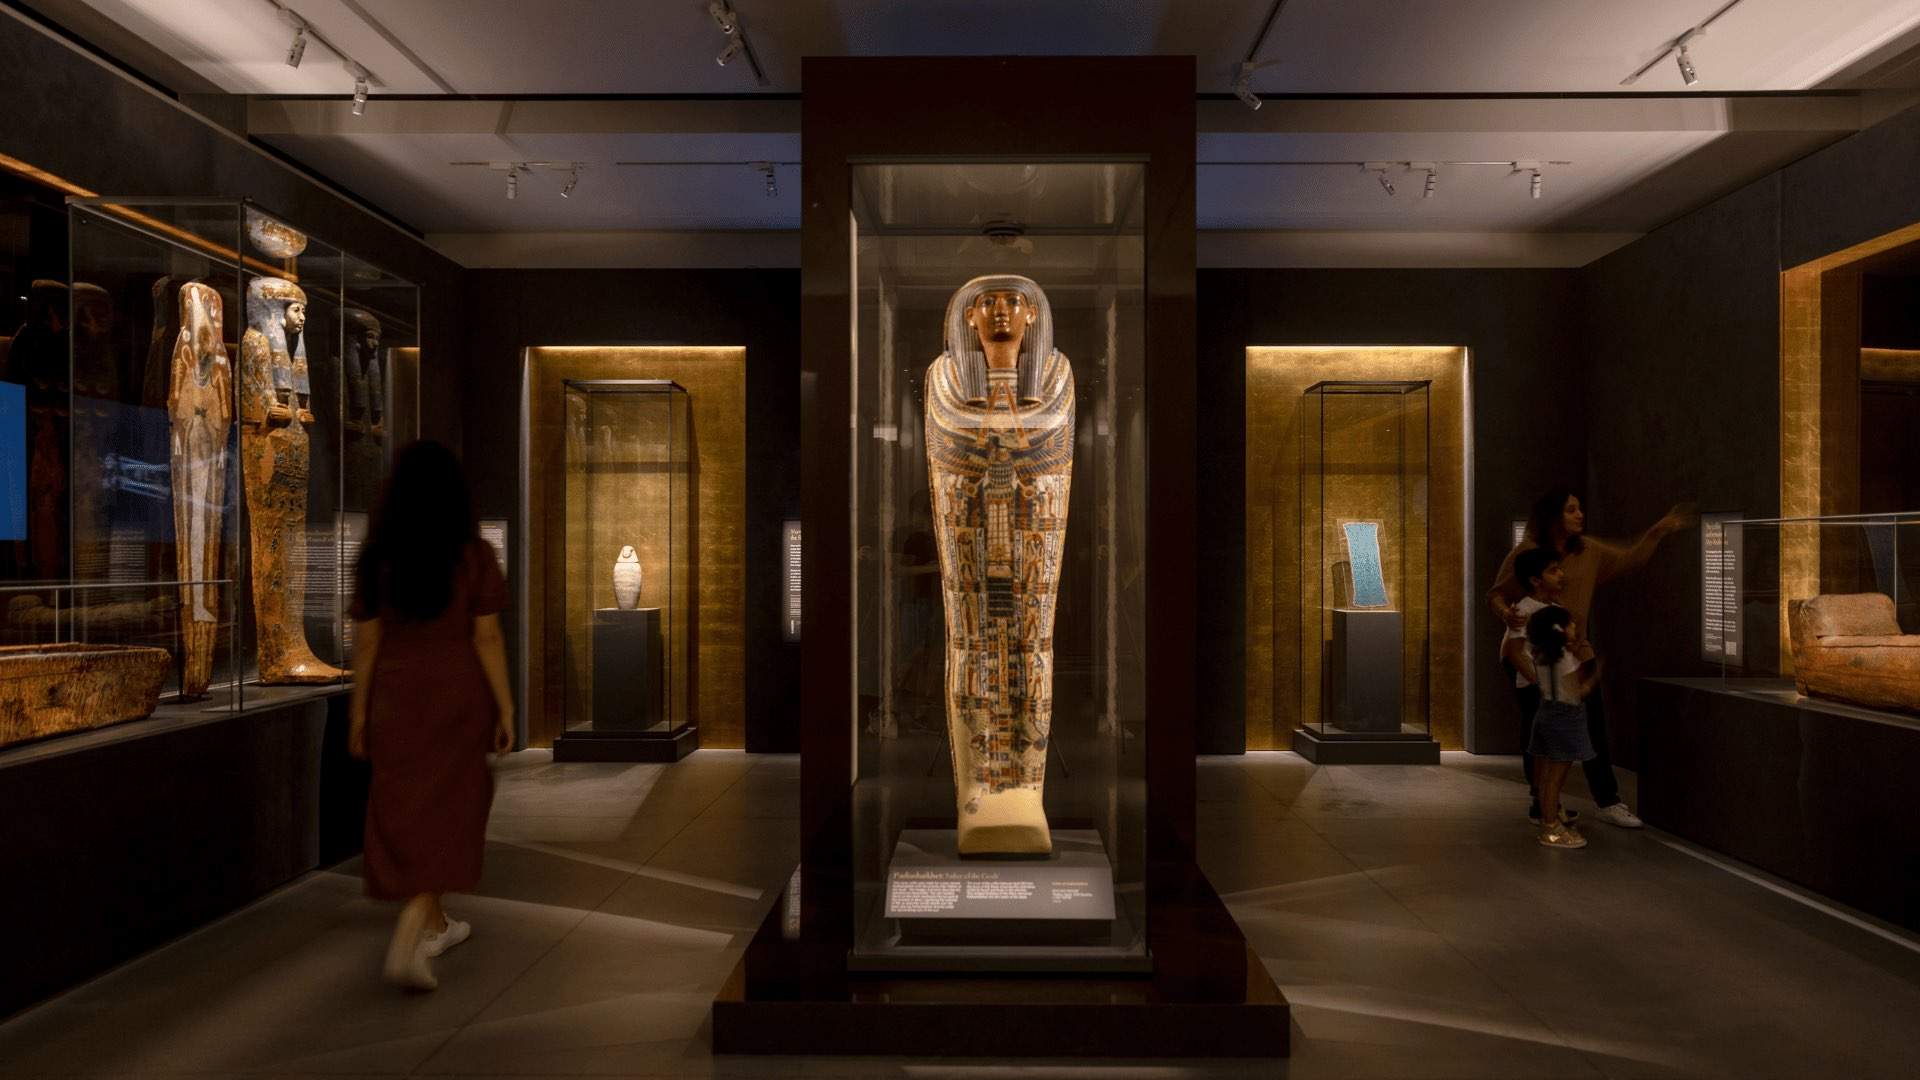 The Egyptian Galleries